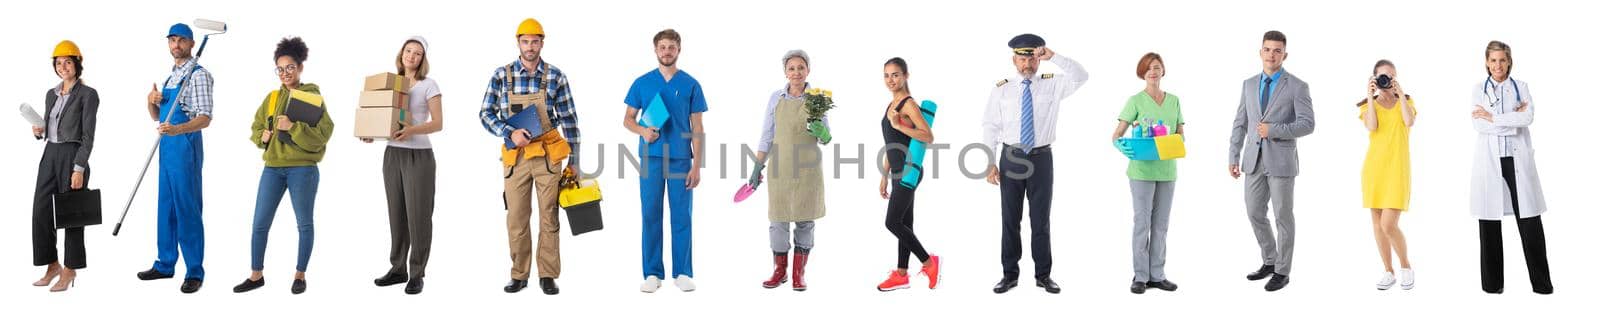 Set of professional workers by ALotOfPeople